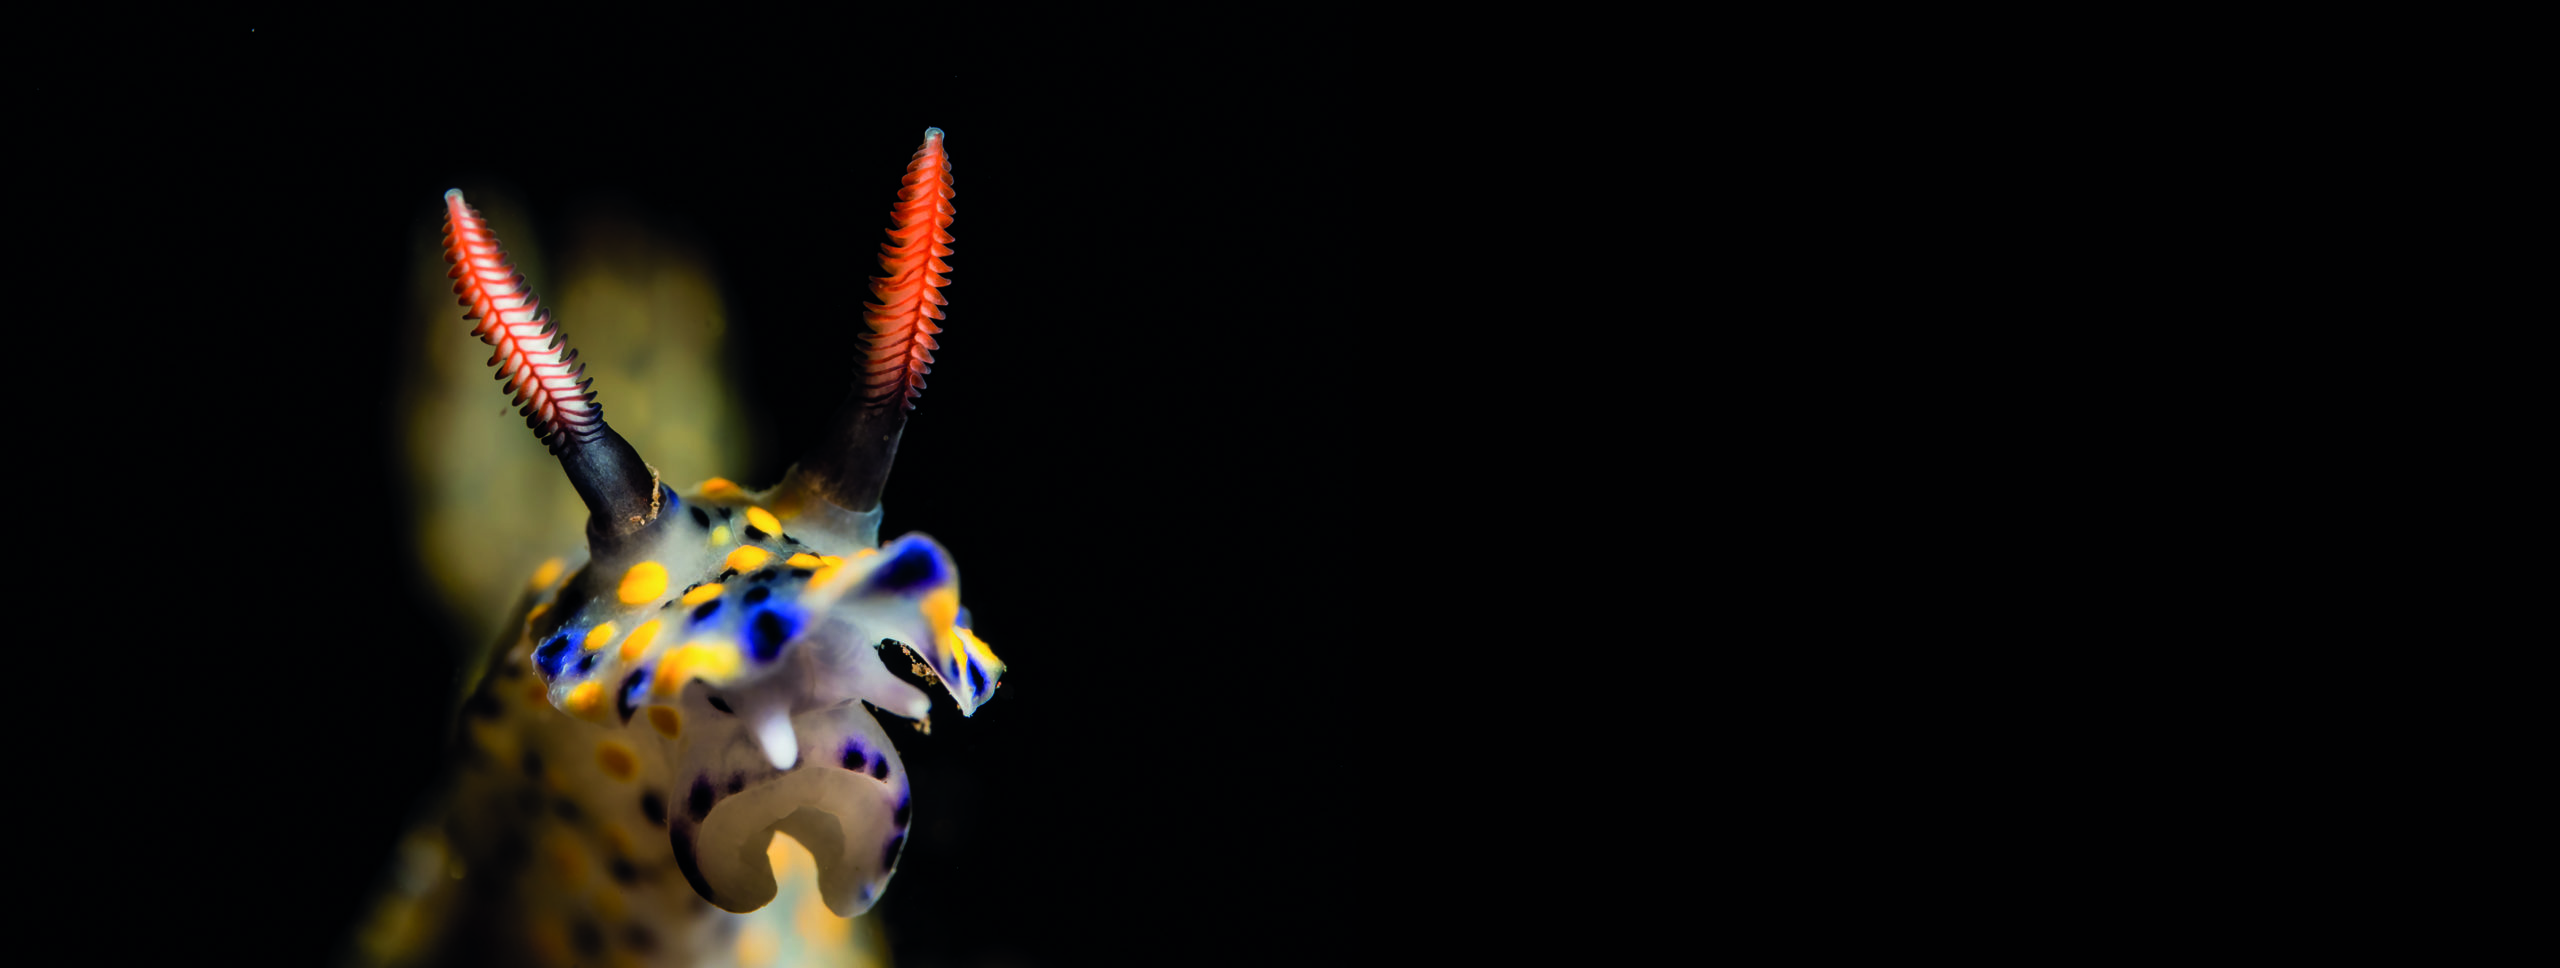 LembehSnooted Nudibranch